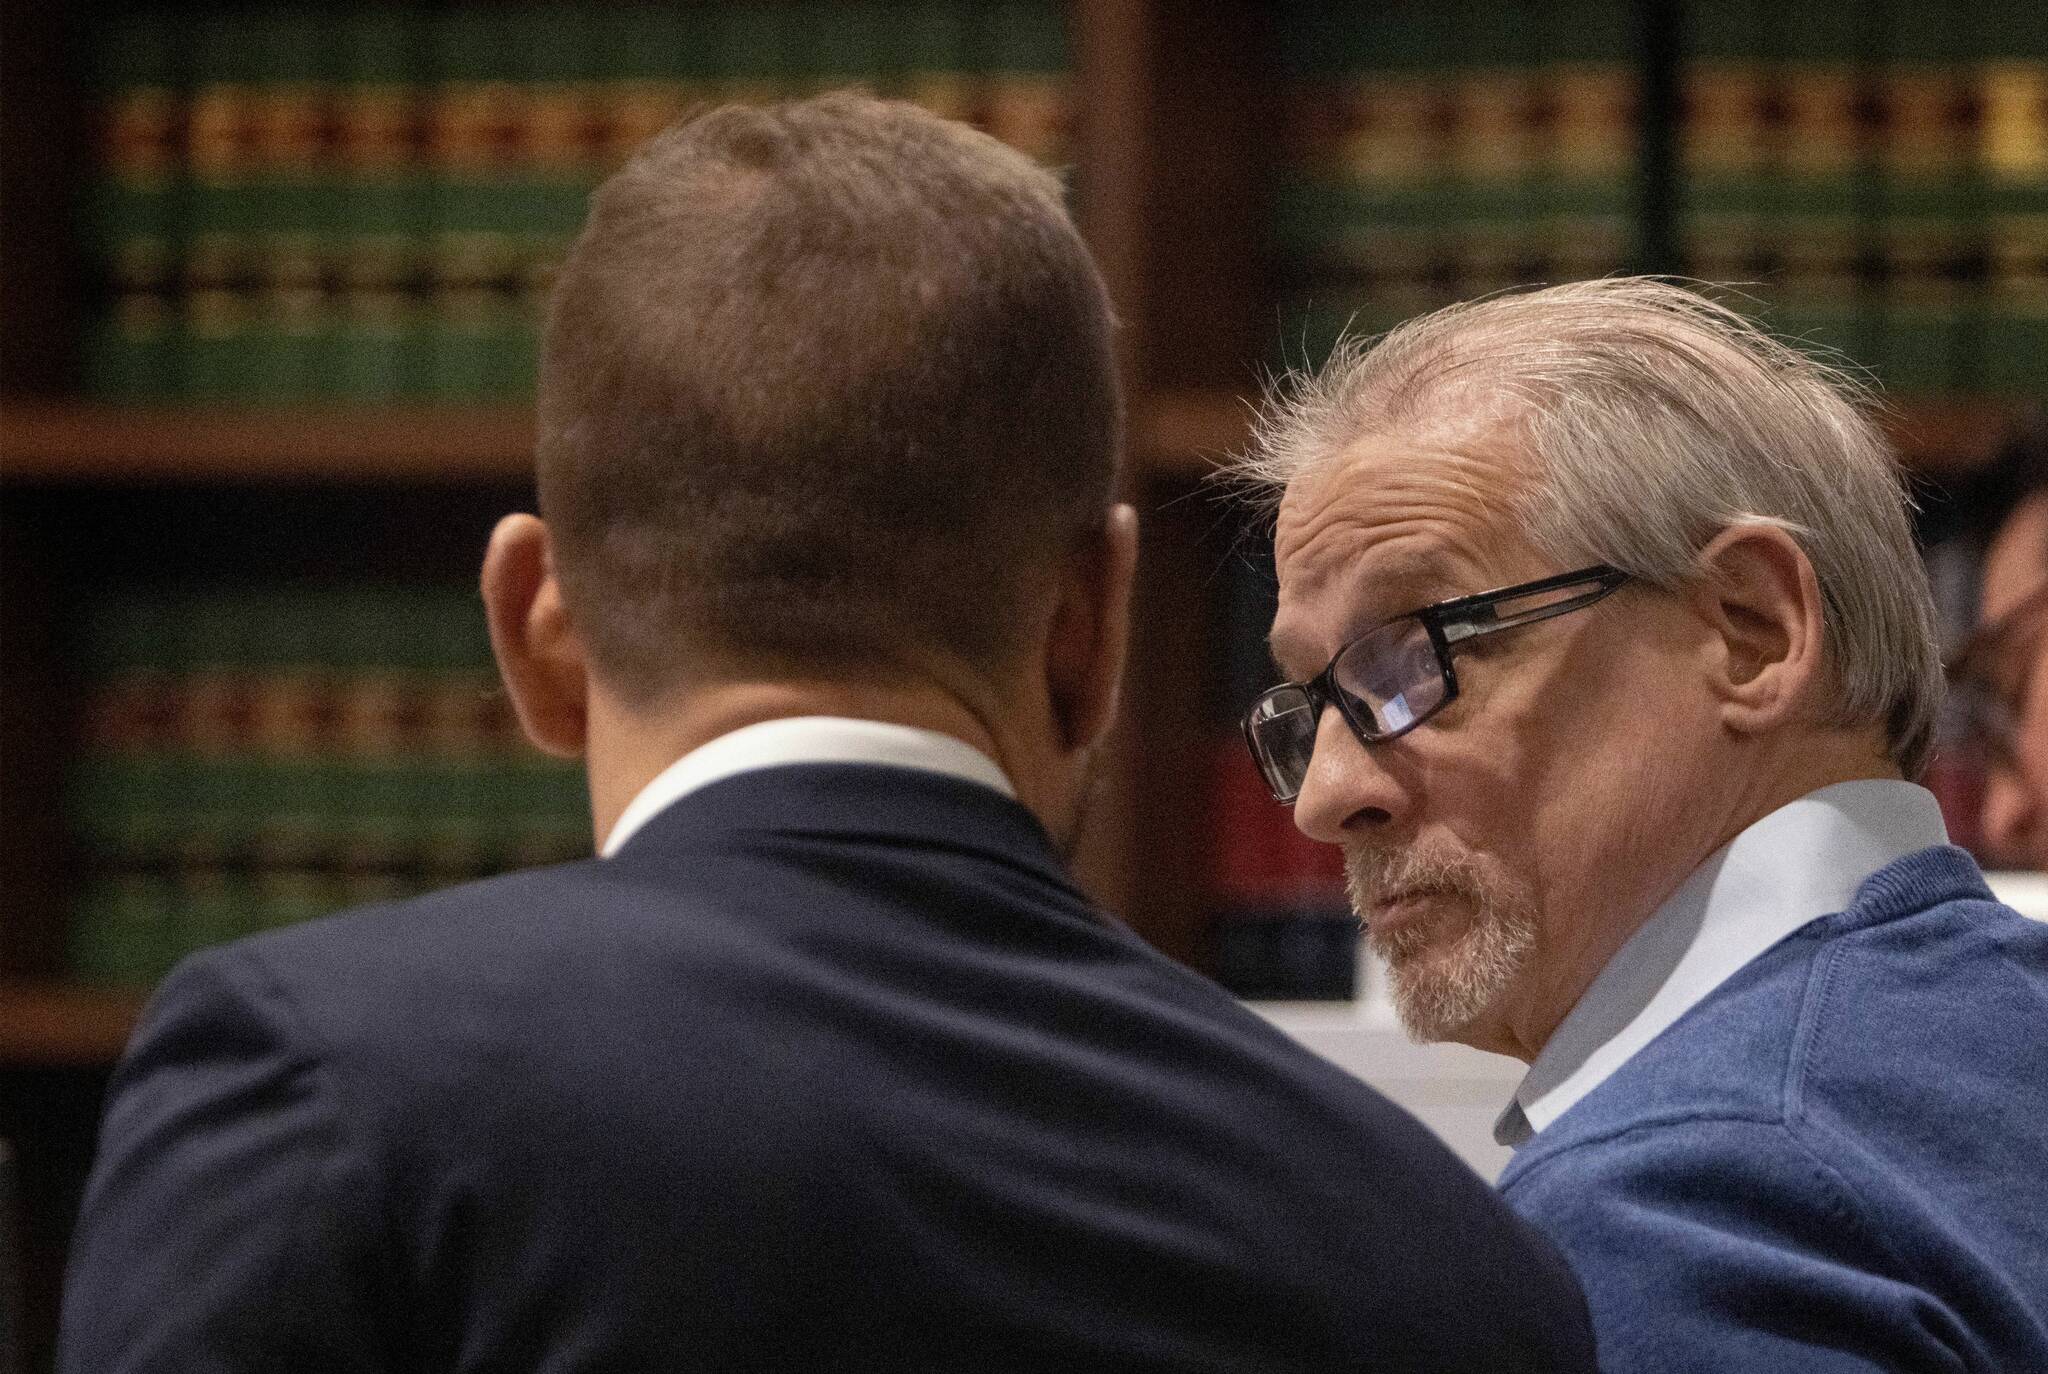 Patrick Nicholas, 59, (right) confers with his defense attorney David Montes after opening statements are made Monday, April 17, 2023, at the Maleng Regional Justice Center in Kent. Nicholas is standing trial for the December 1991 killing of 16-year-old Sarah Yarborough. Ellen M. Banner/The Seattle Times